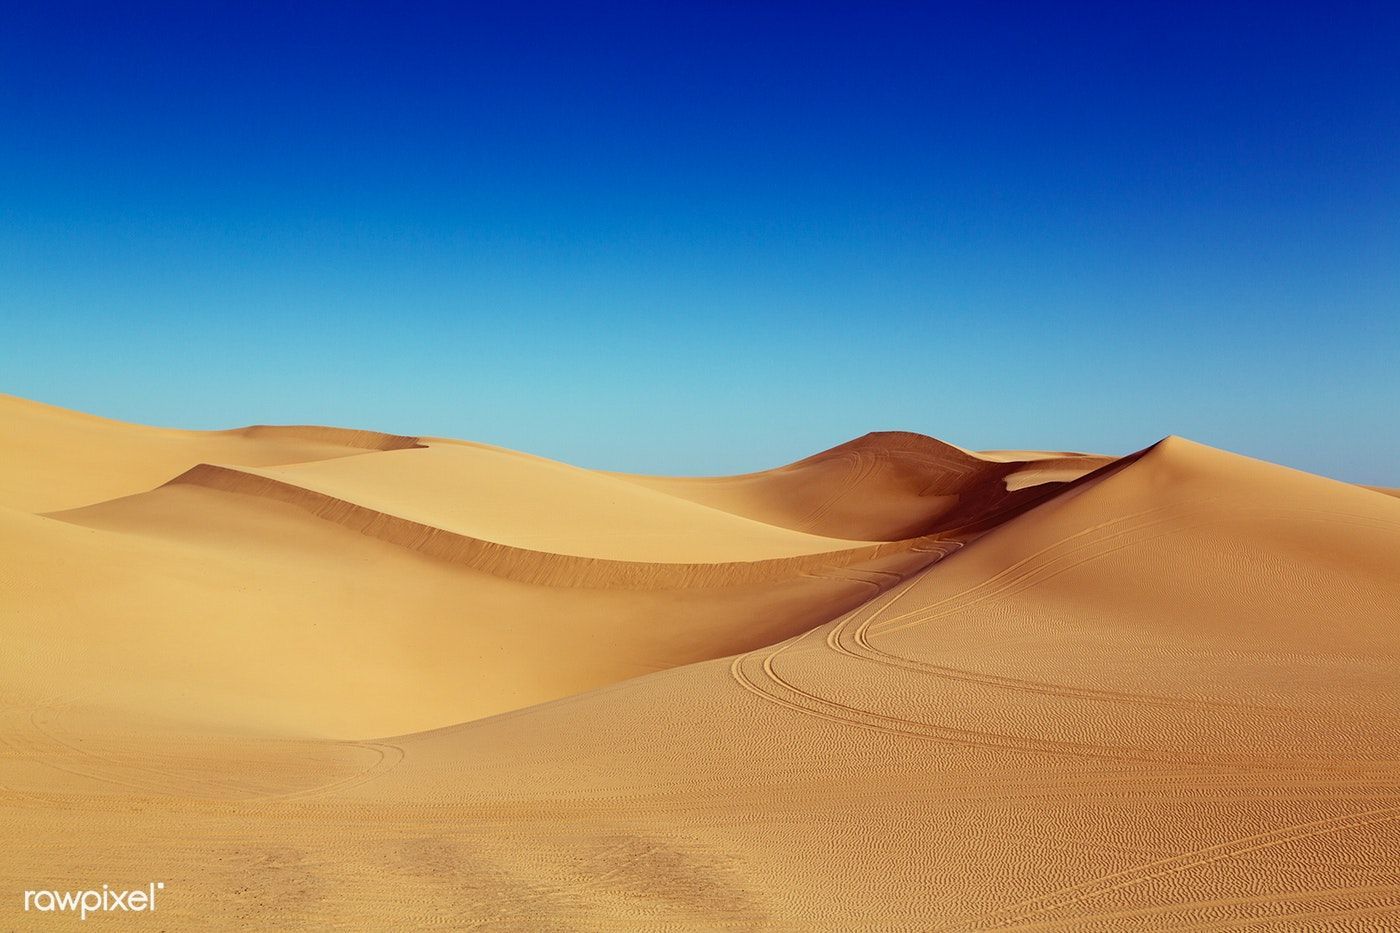 Located in the southeast corner of California, the Imperial Sand